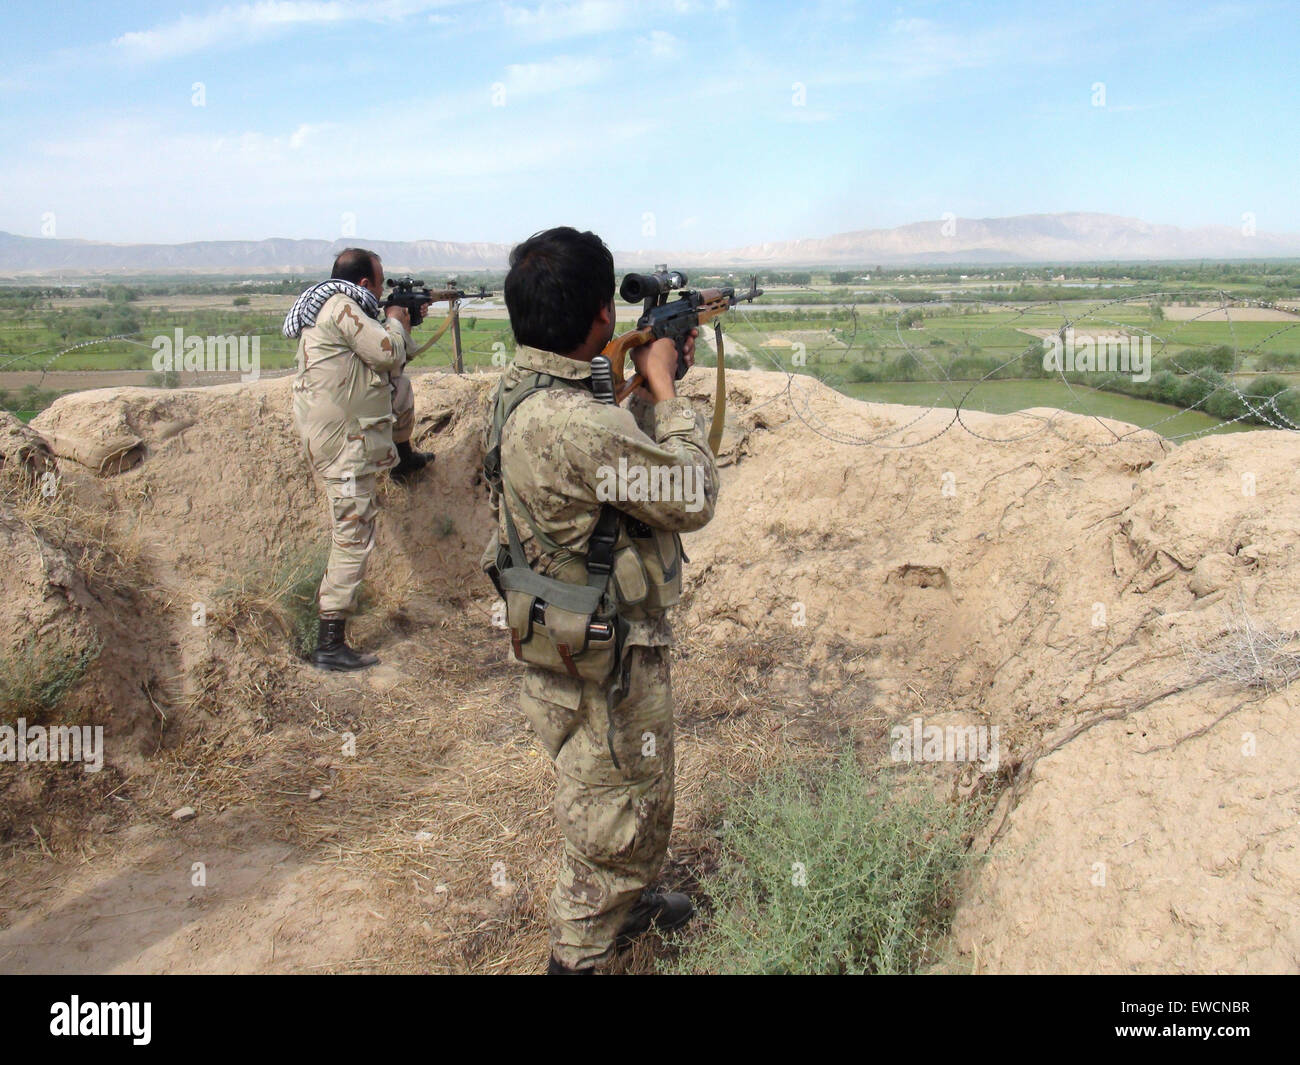 (150623) -- KUNDUZ, June 23, 2015 (Xinhua) -- Afghan snipers aim their weapons toward Taliban militants during an operation against Taliban in Kunduz province, northern Afghanistan, June 23, 2015. Afghan National Security Forces (ANSF) on Tuesday recaptured a district in northern province of Kunduz seized by Taliban militants over the weekend, killing over 80 rebels, provincial government spokesman said. (Xinhua/Ajmal) (zjy) Stock Photo